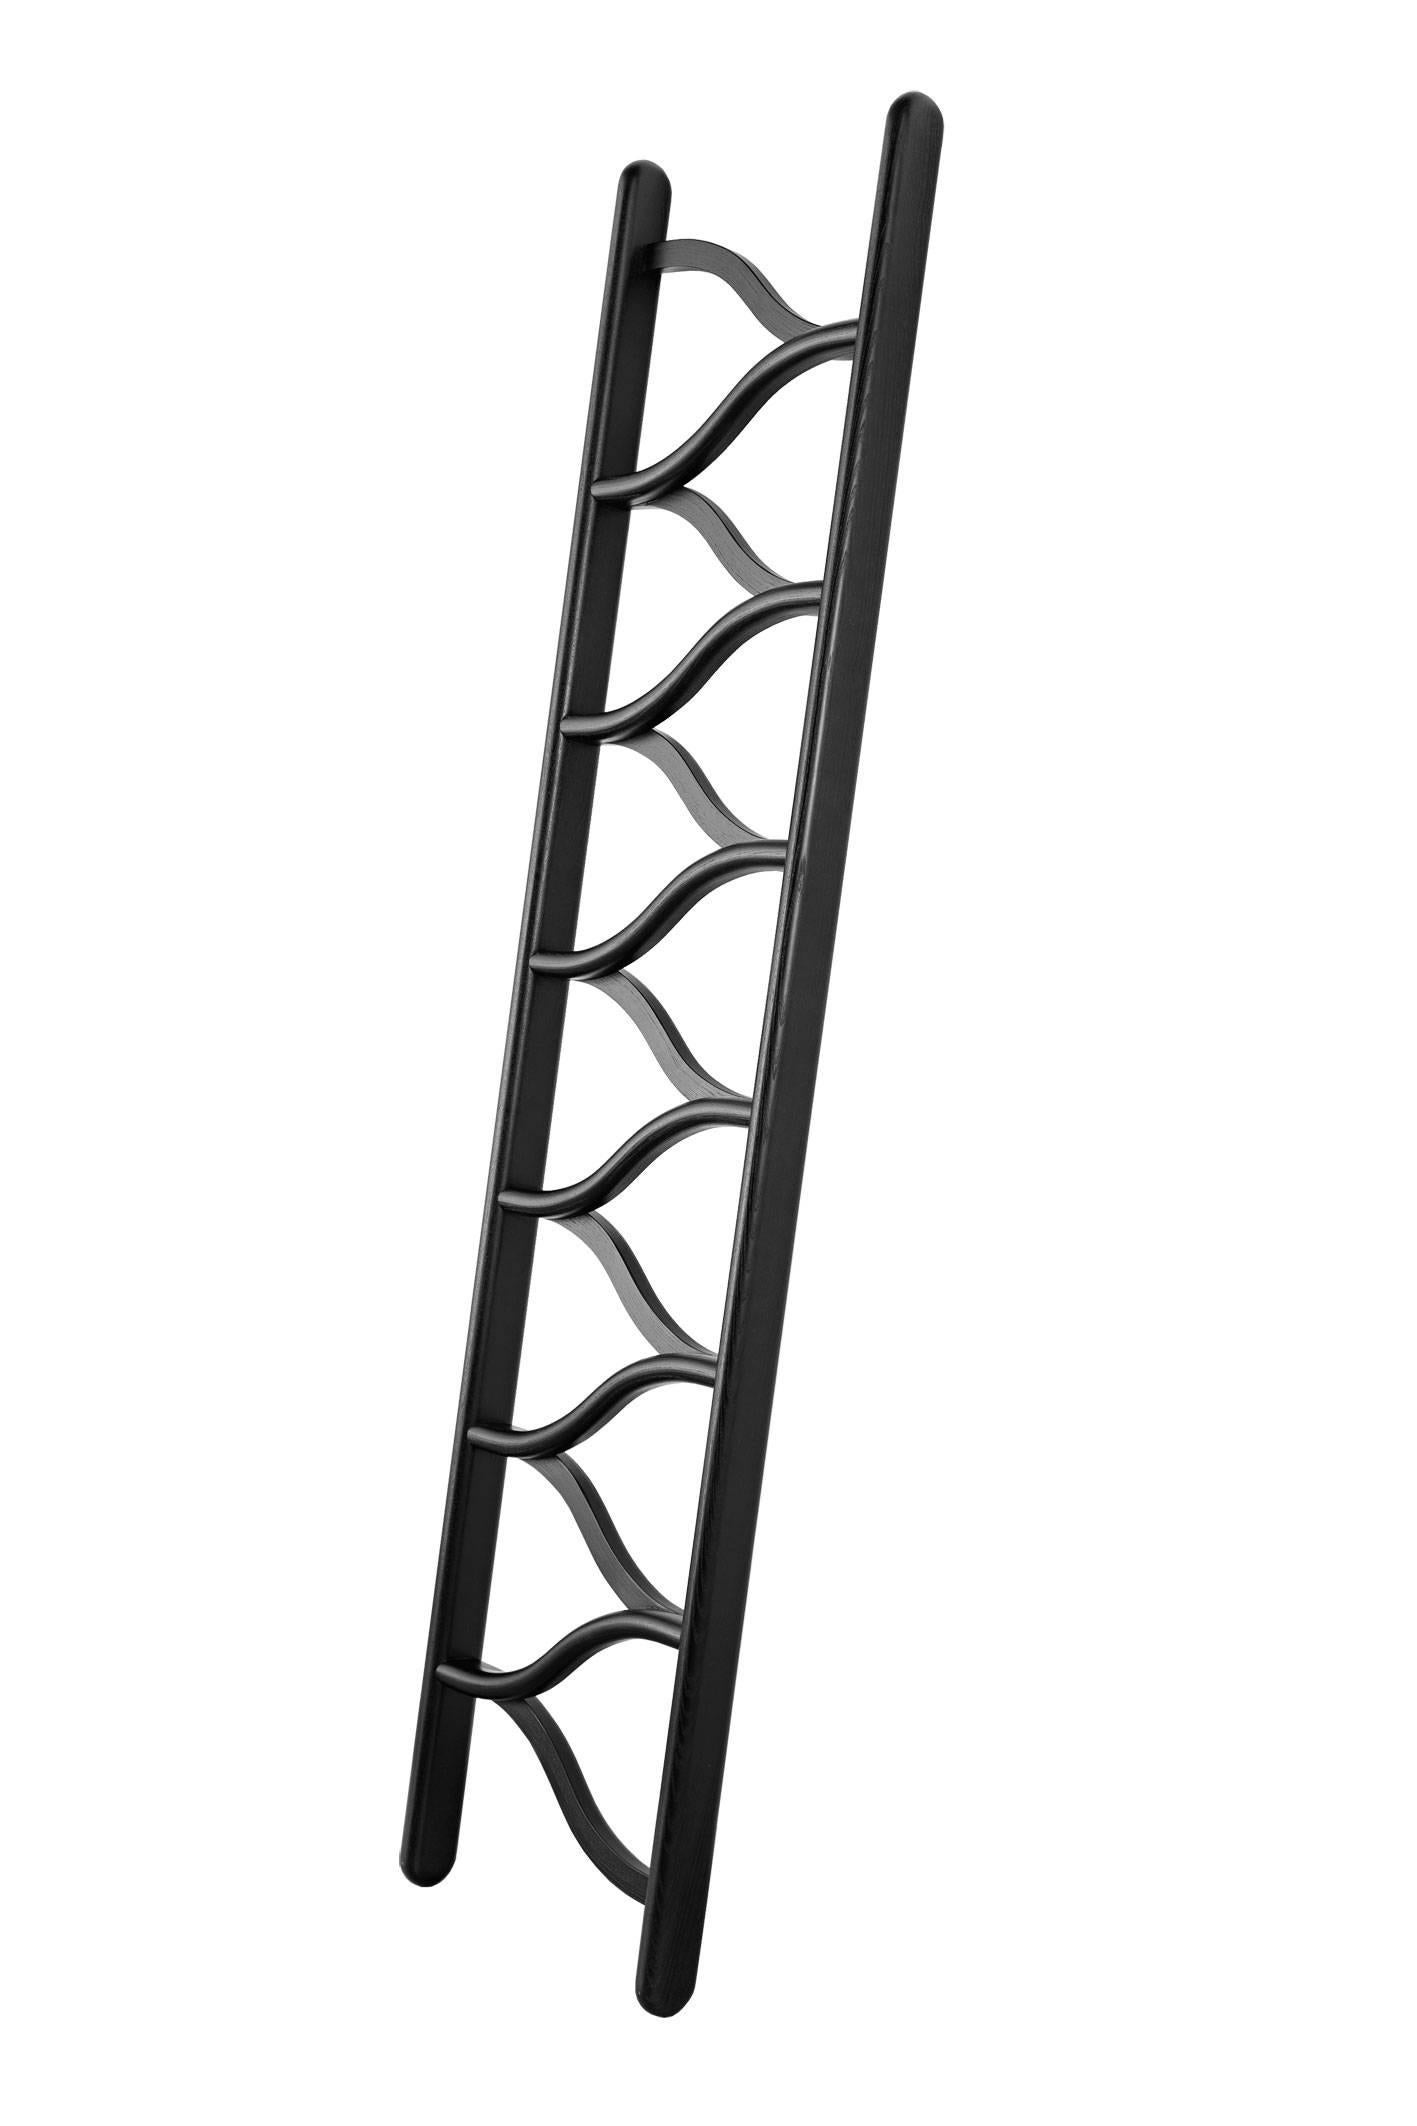 Ladder made from bentwood, steam-formed ash, laquered in black. This ladder is draws inspiration from climbing a tree, its steps allow for a more organic mounting. The steps are made from bentwood ash which are steam formed in the tradition of